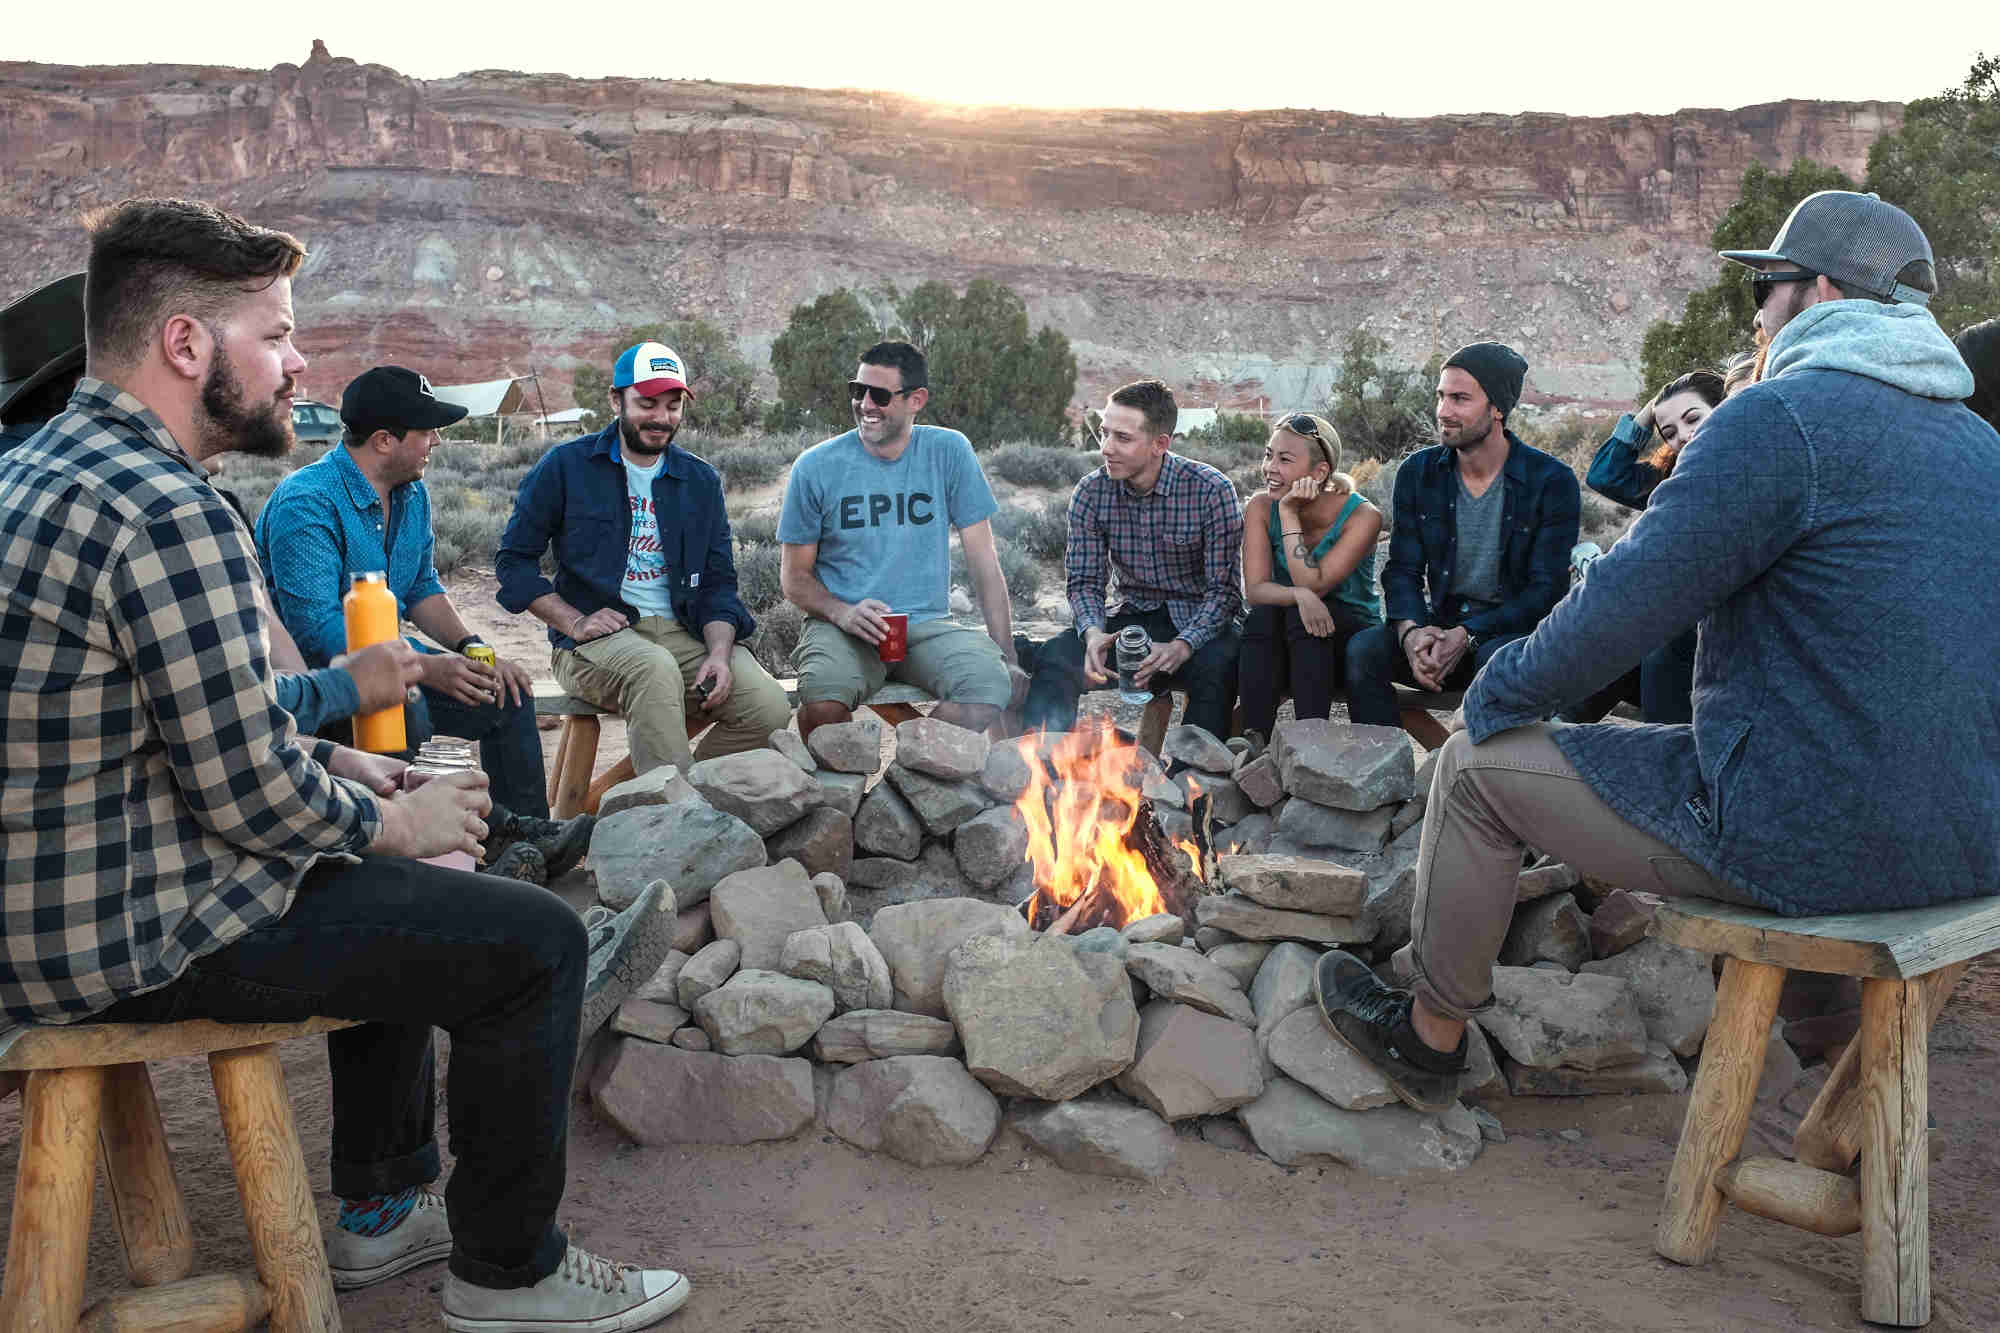 People gathered around an outdoor fire pit in the desert